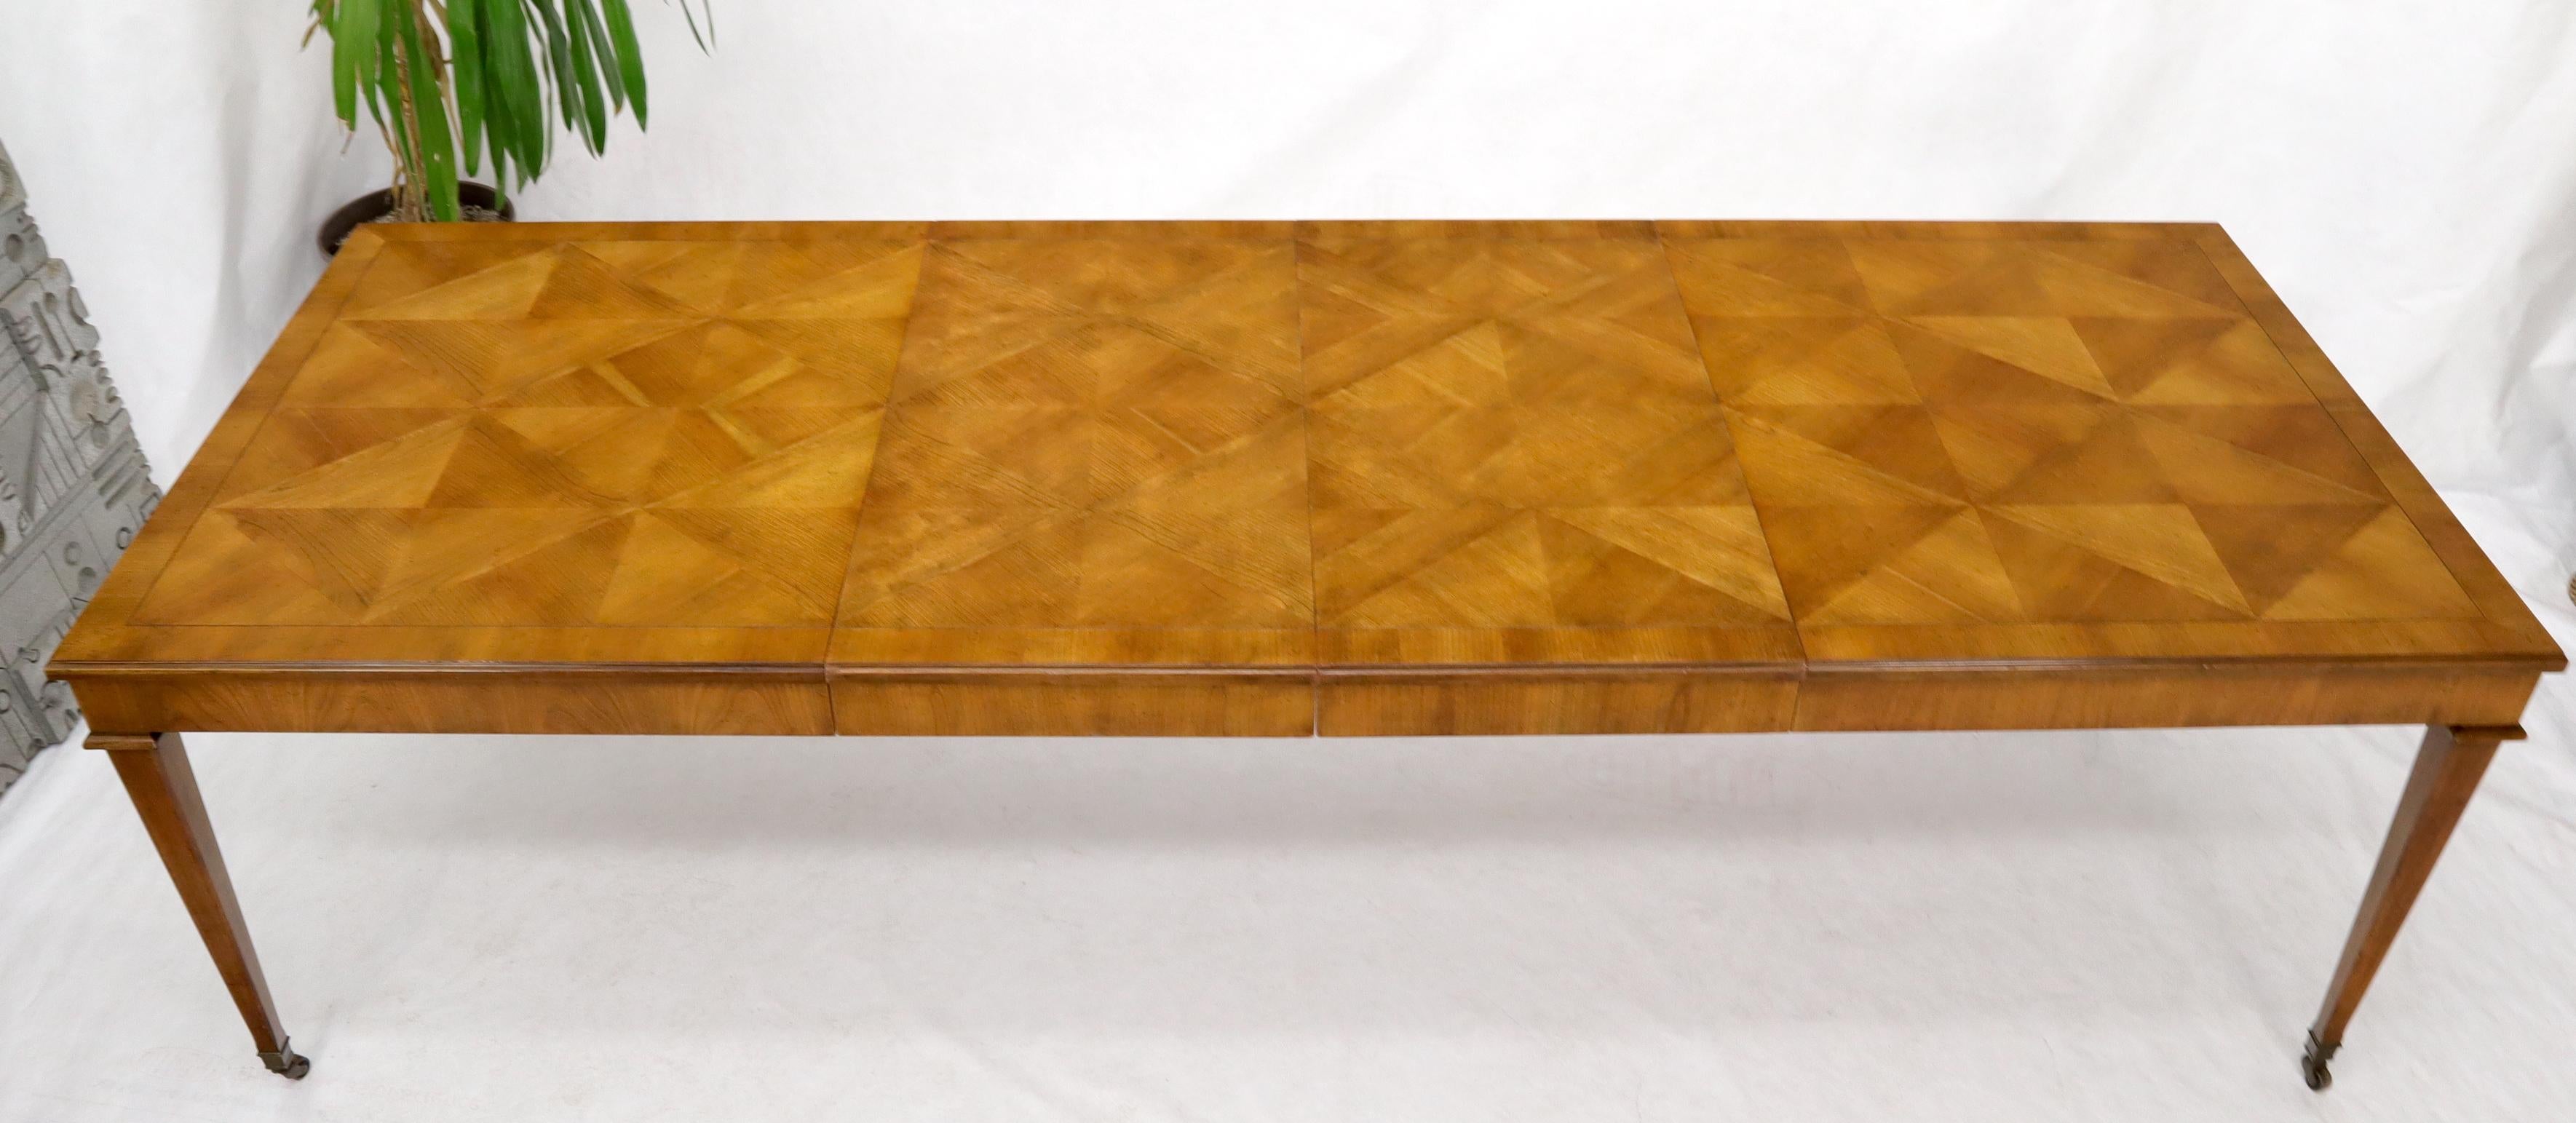 20th Century Baker Parquet Top Rectangle Dining Table with Two Extension Leaves Boards